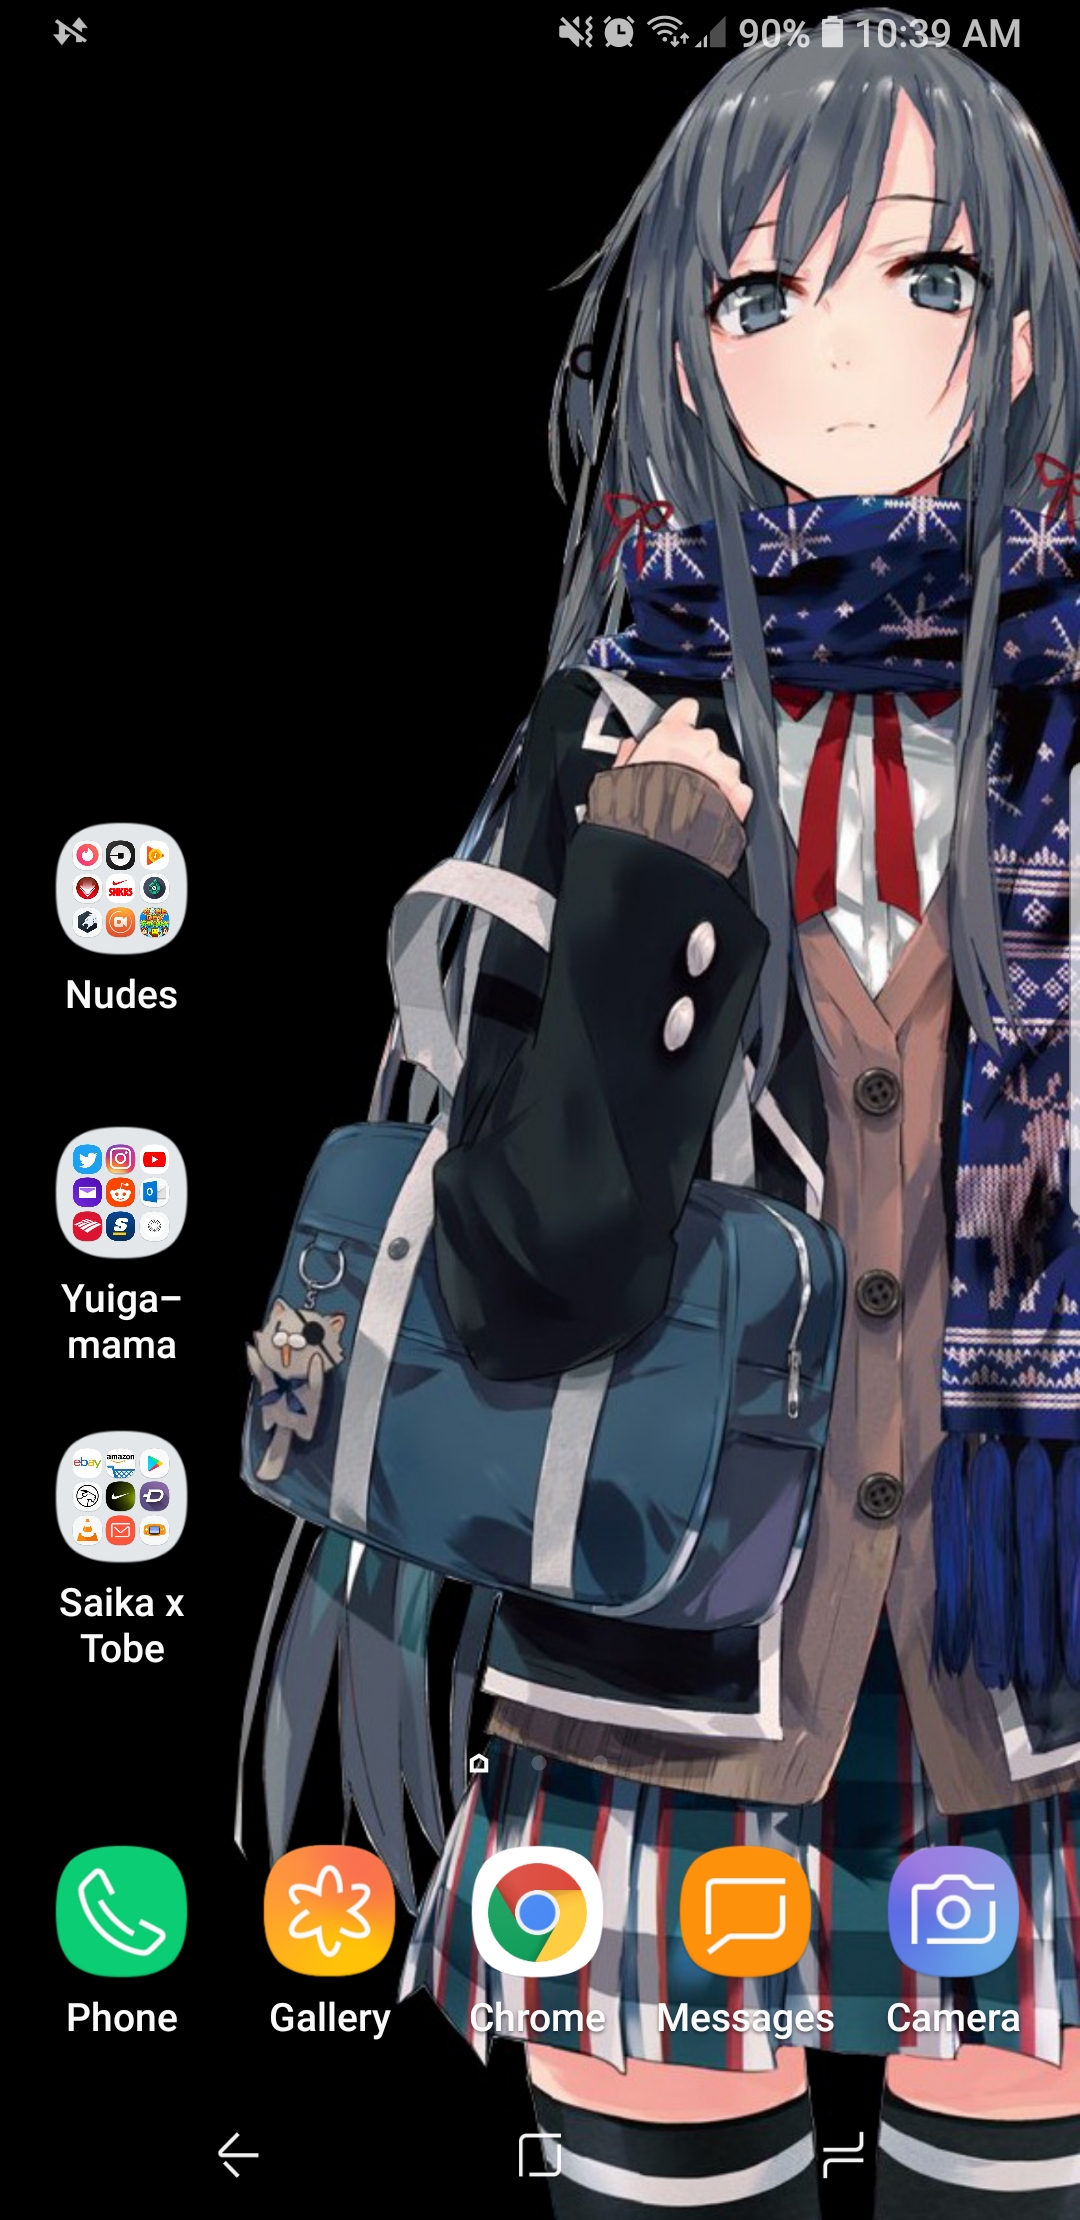 Shitpostcan't Let Others See My Phone Wallpaper - Oregairu Wallpaper Phone , HD Wallpaper & Backgrounds